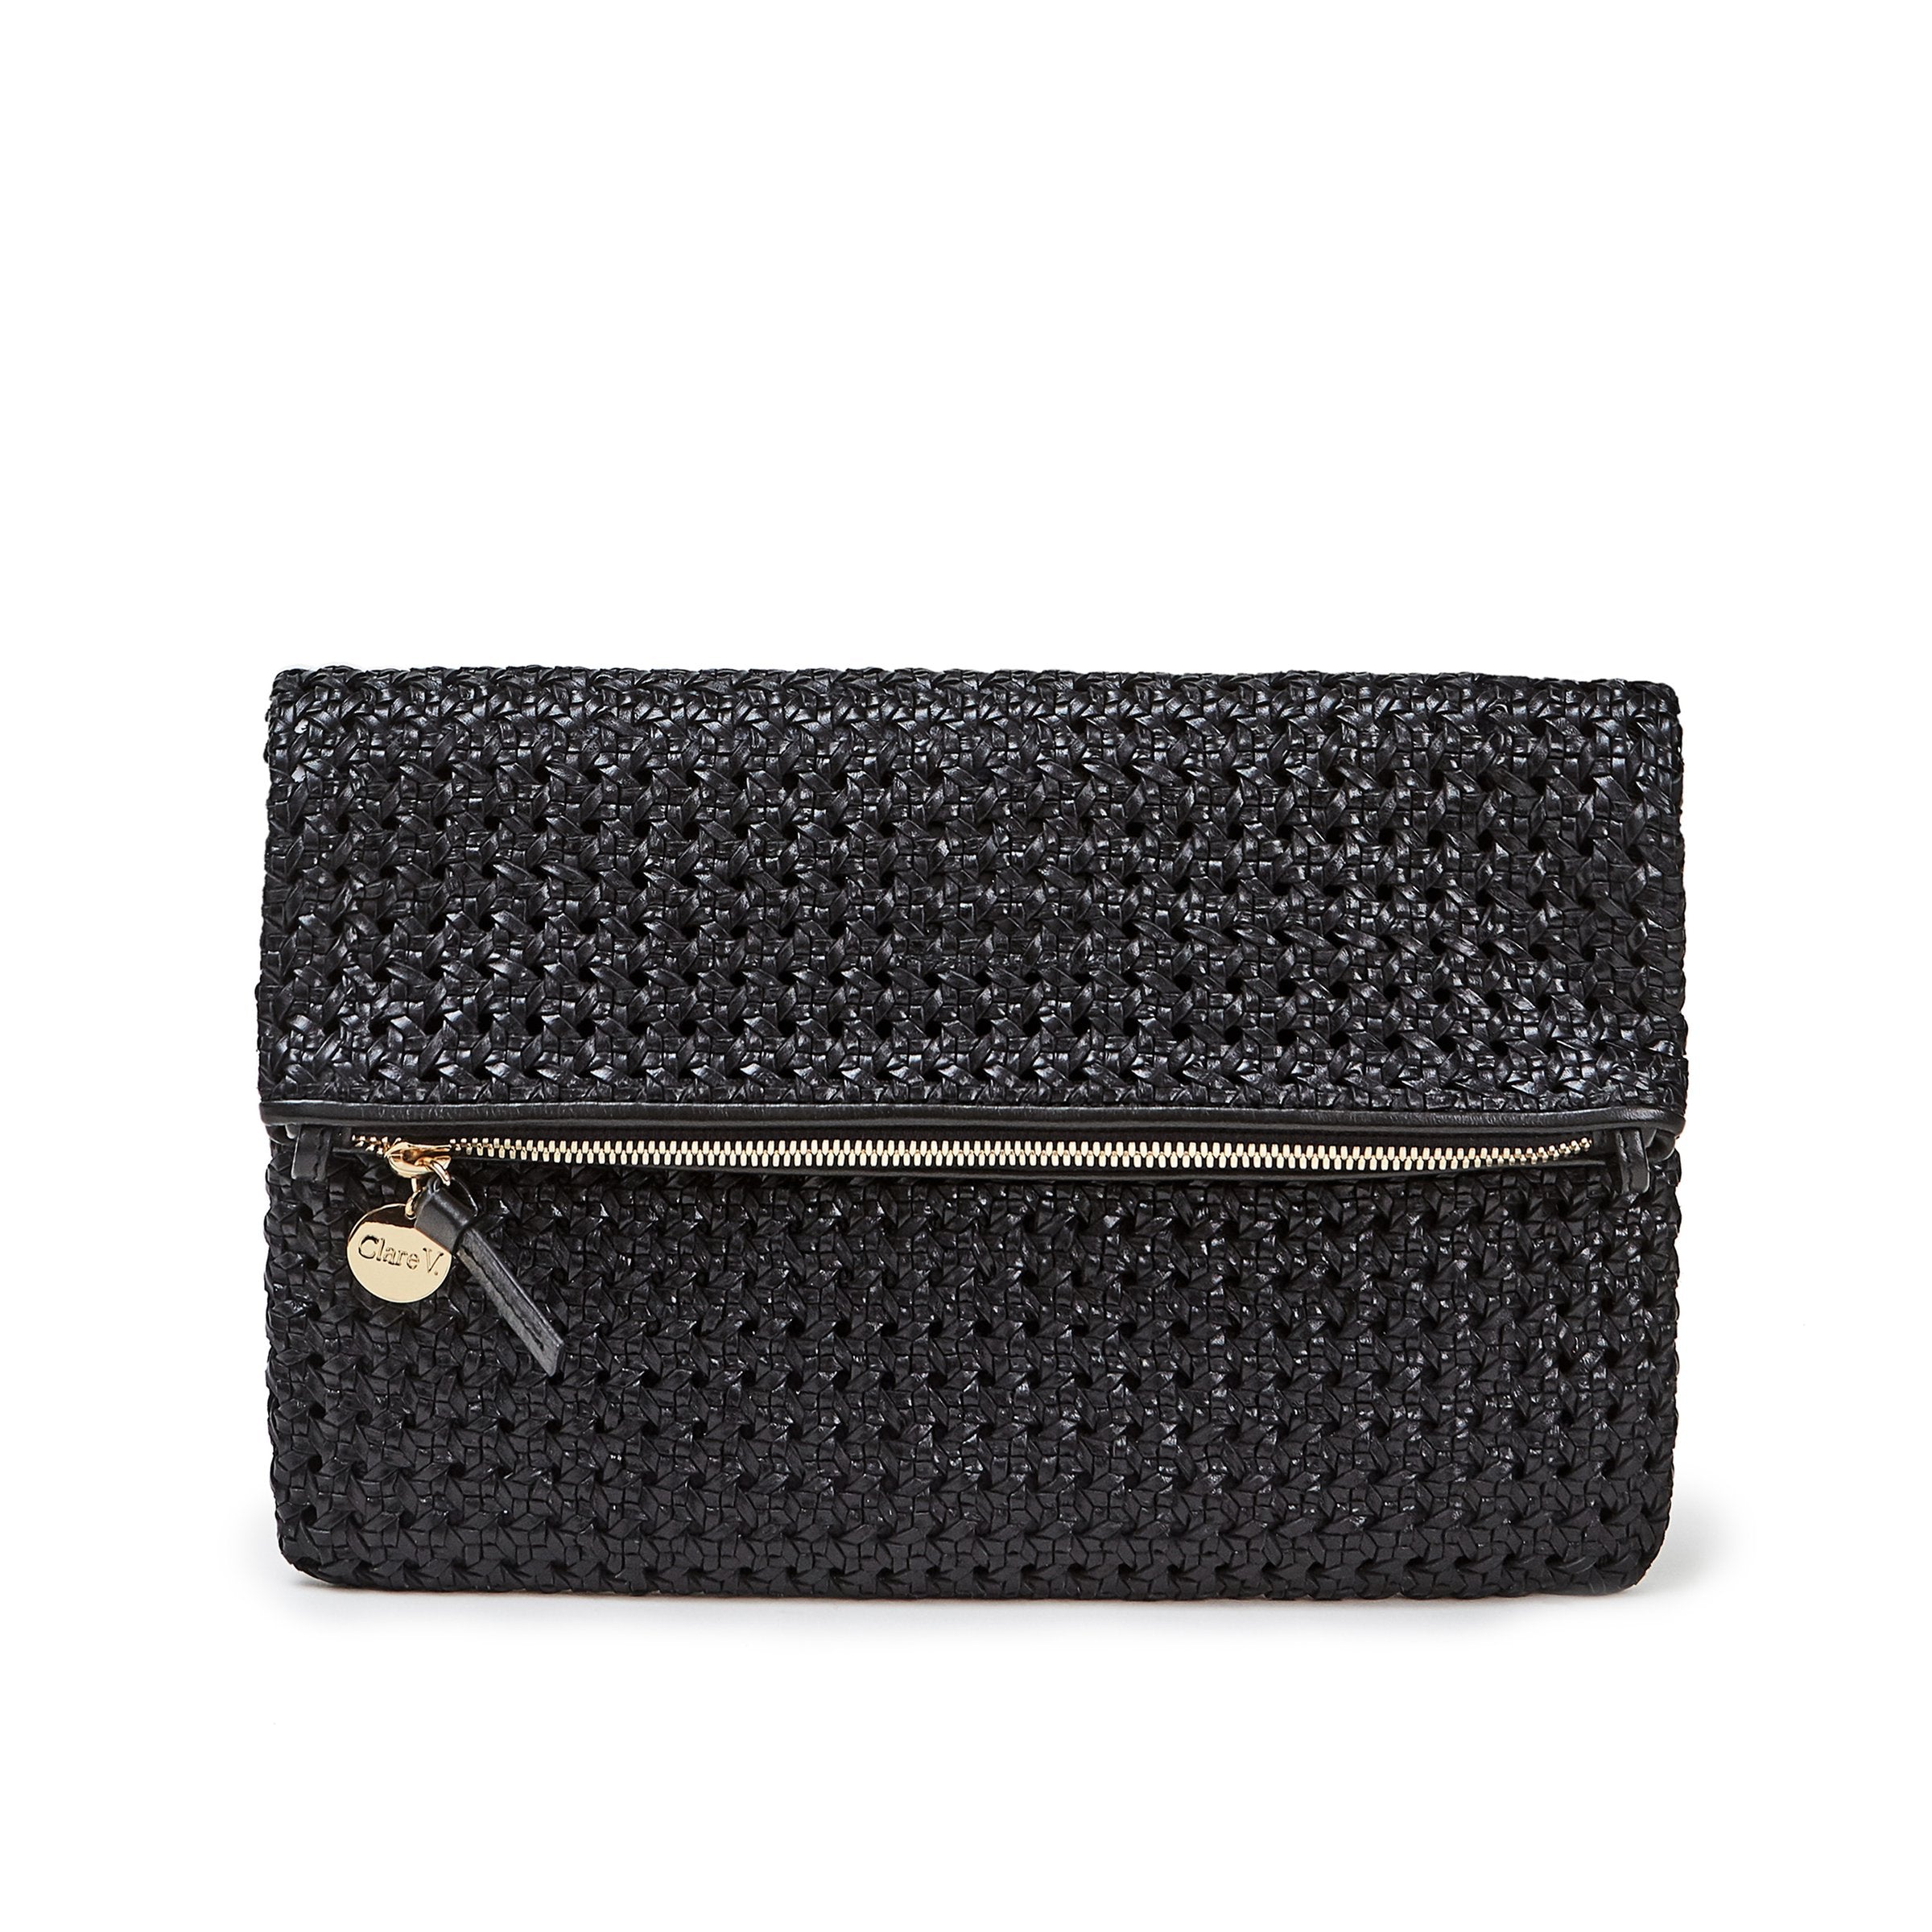 Clare V. Rattan Foldover Clutch w/ Tabs in Cream - Bliss Boutiques